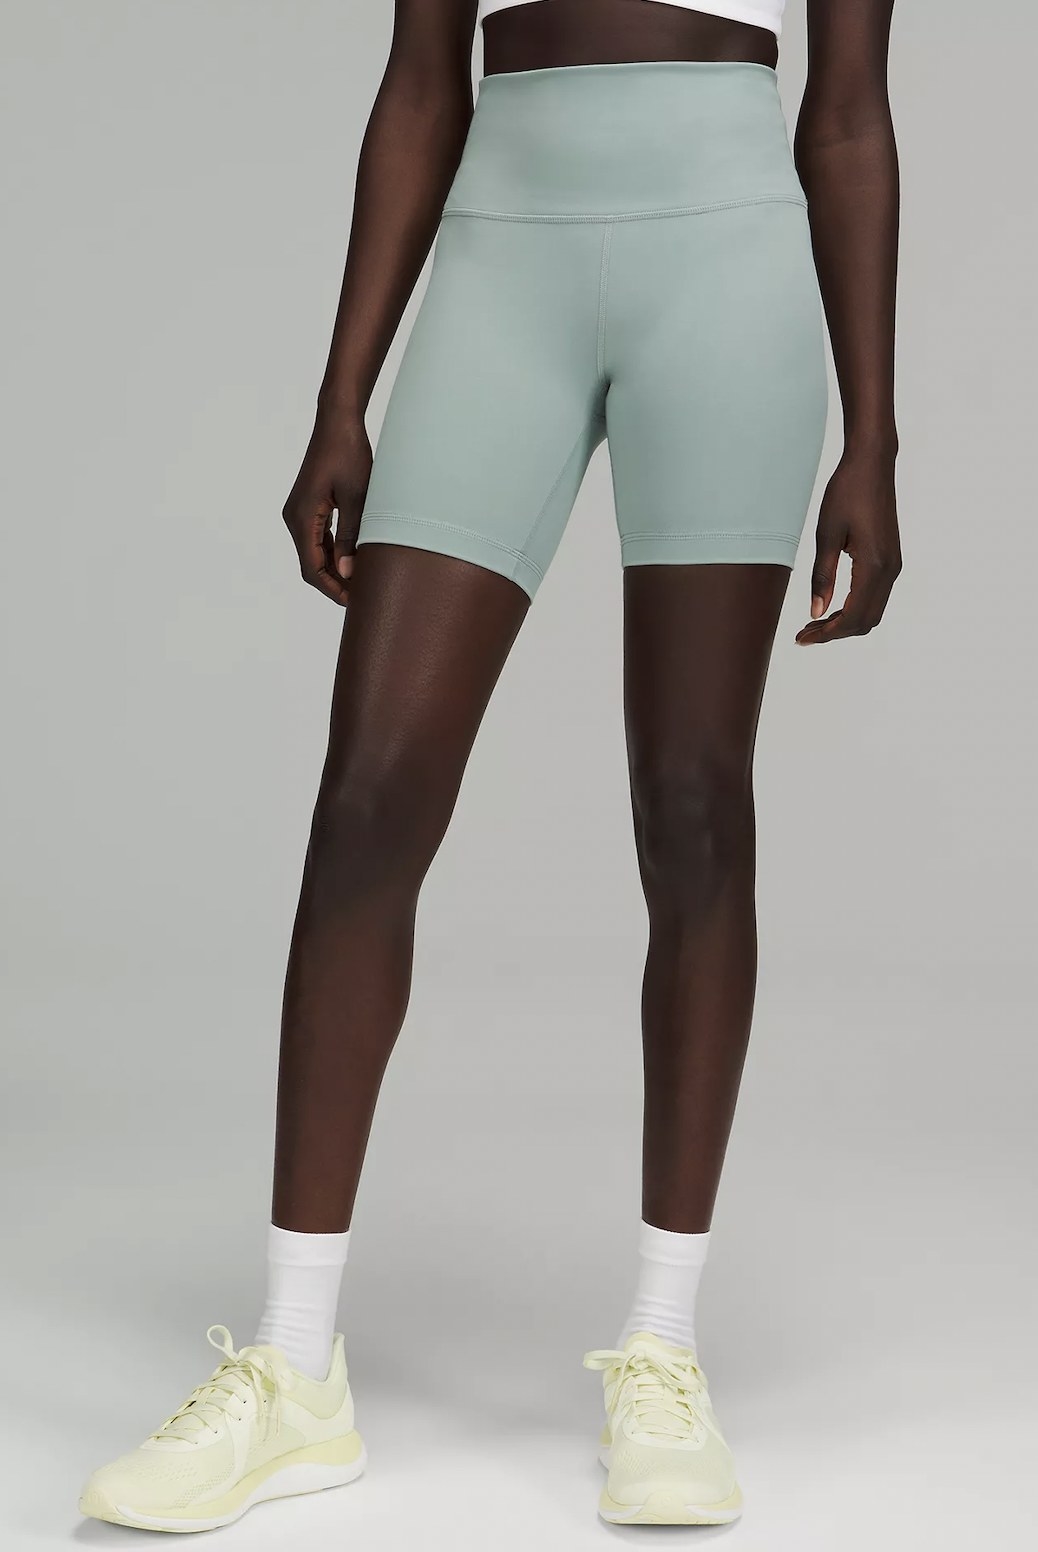 a model wearing the shorts in mint green